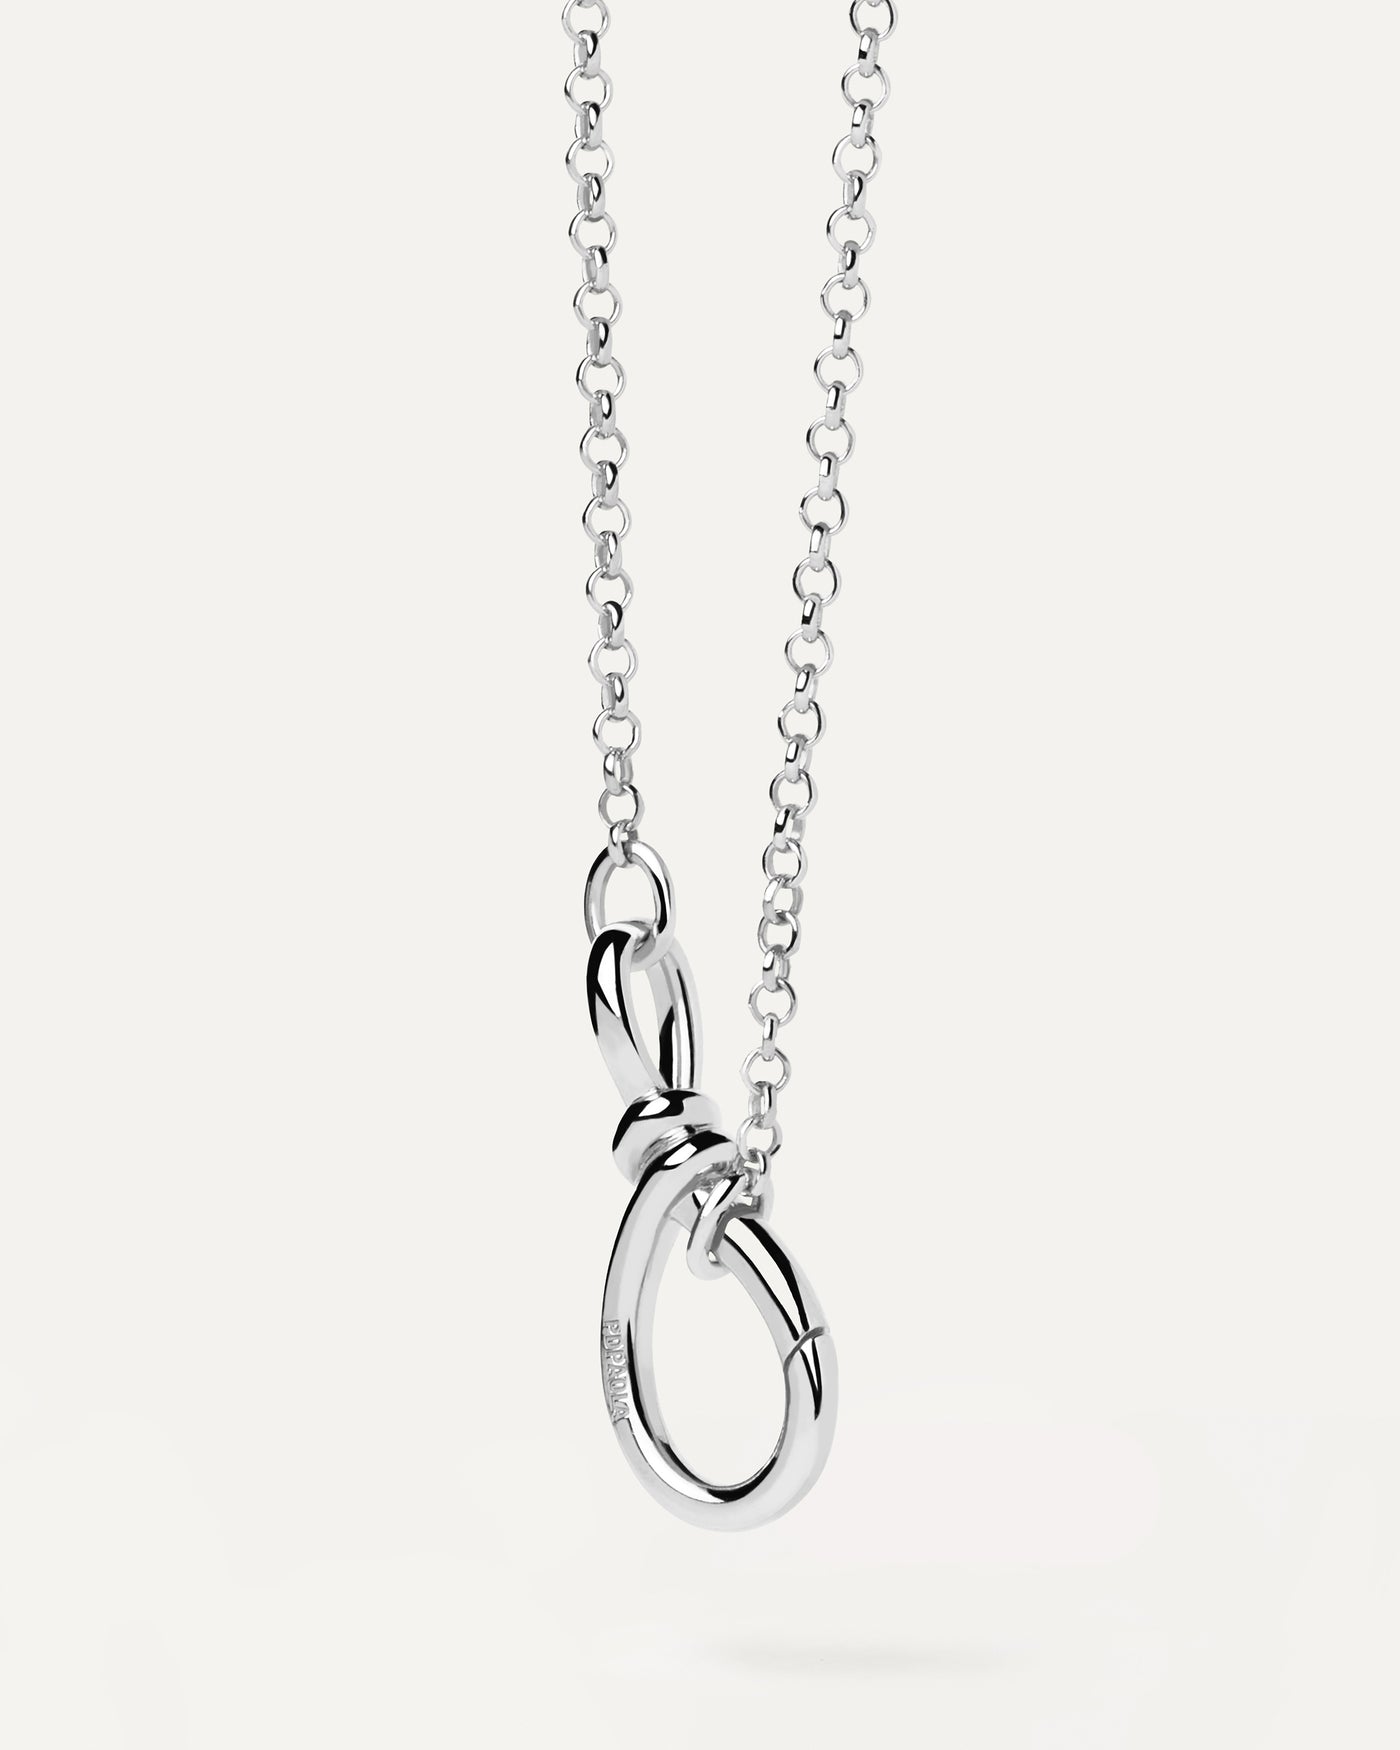 2023 Selection | Stacker Clasp Silver Chain Necklace. Get the latest arrival from PDPAOLA. Place your order safely and get this Best Seller. Free Shipping.